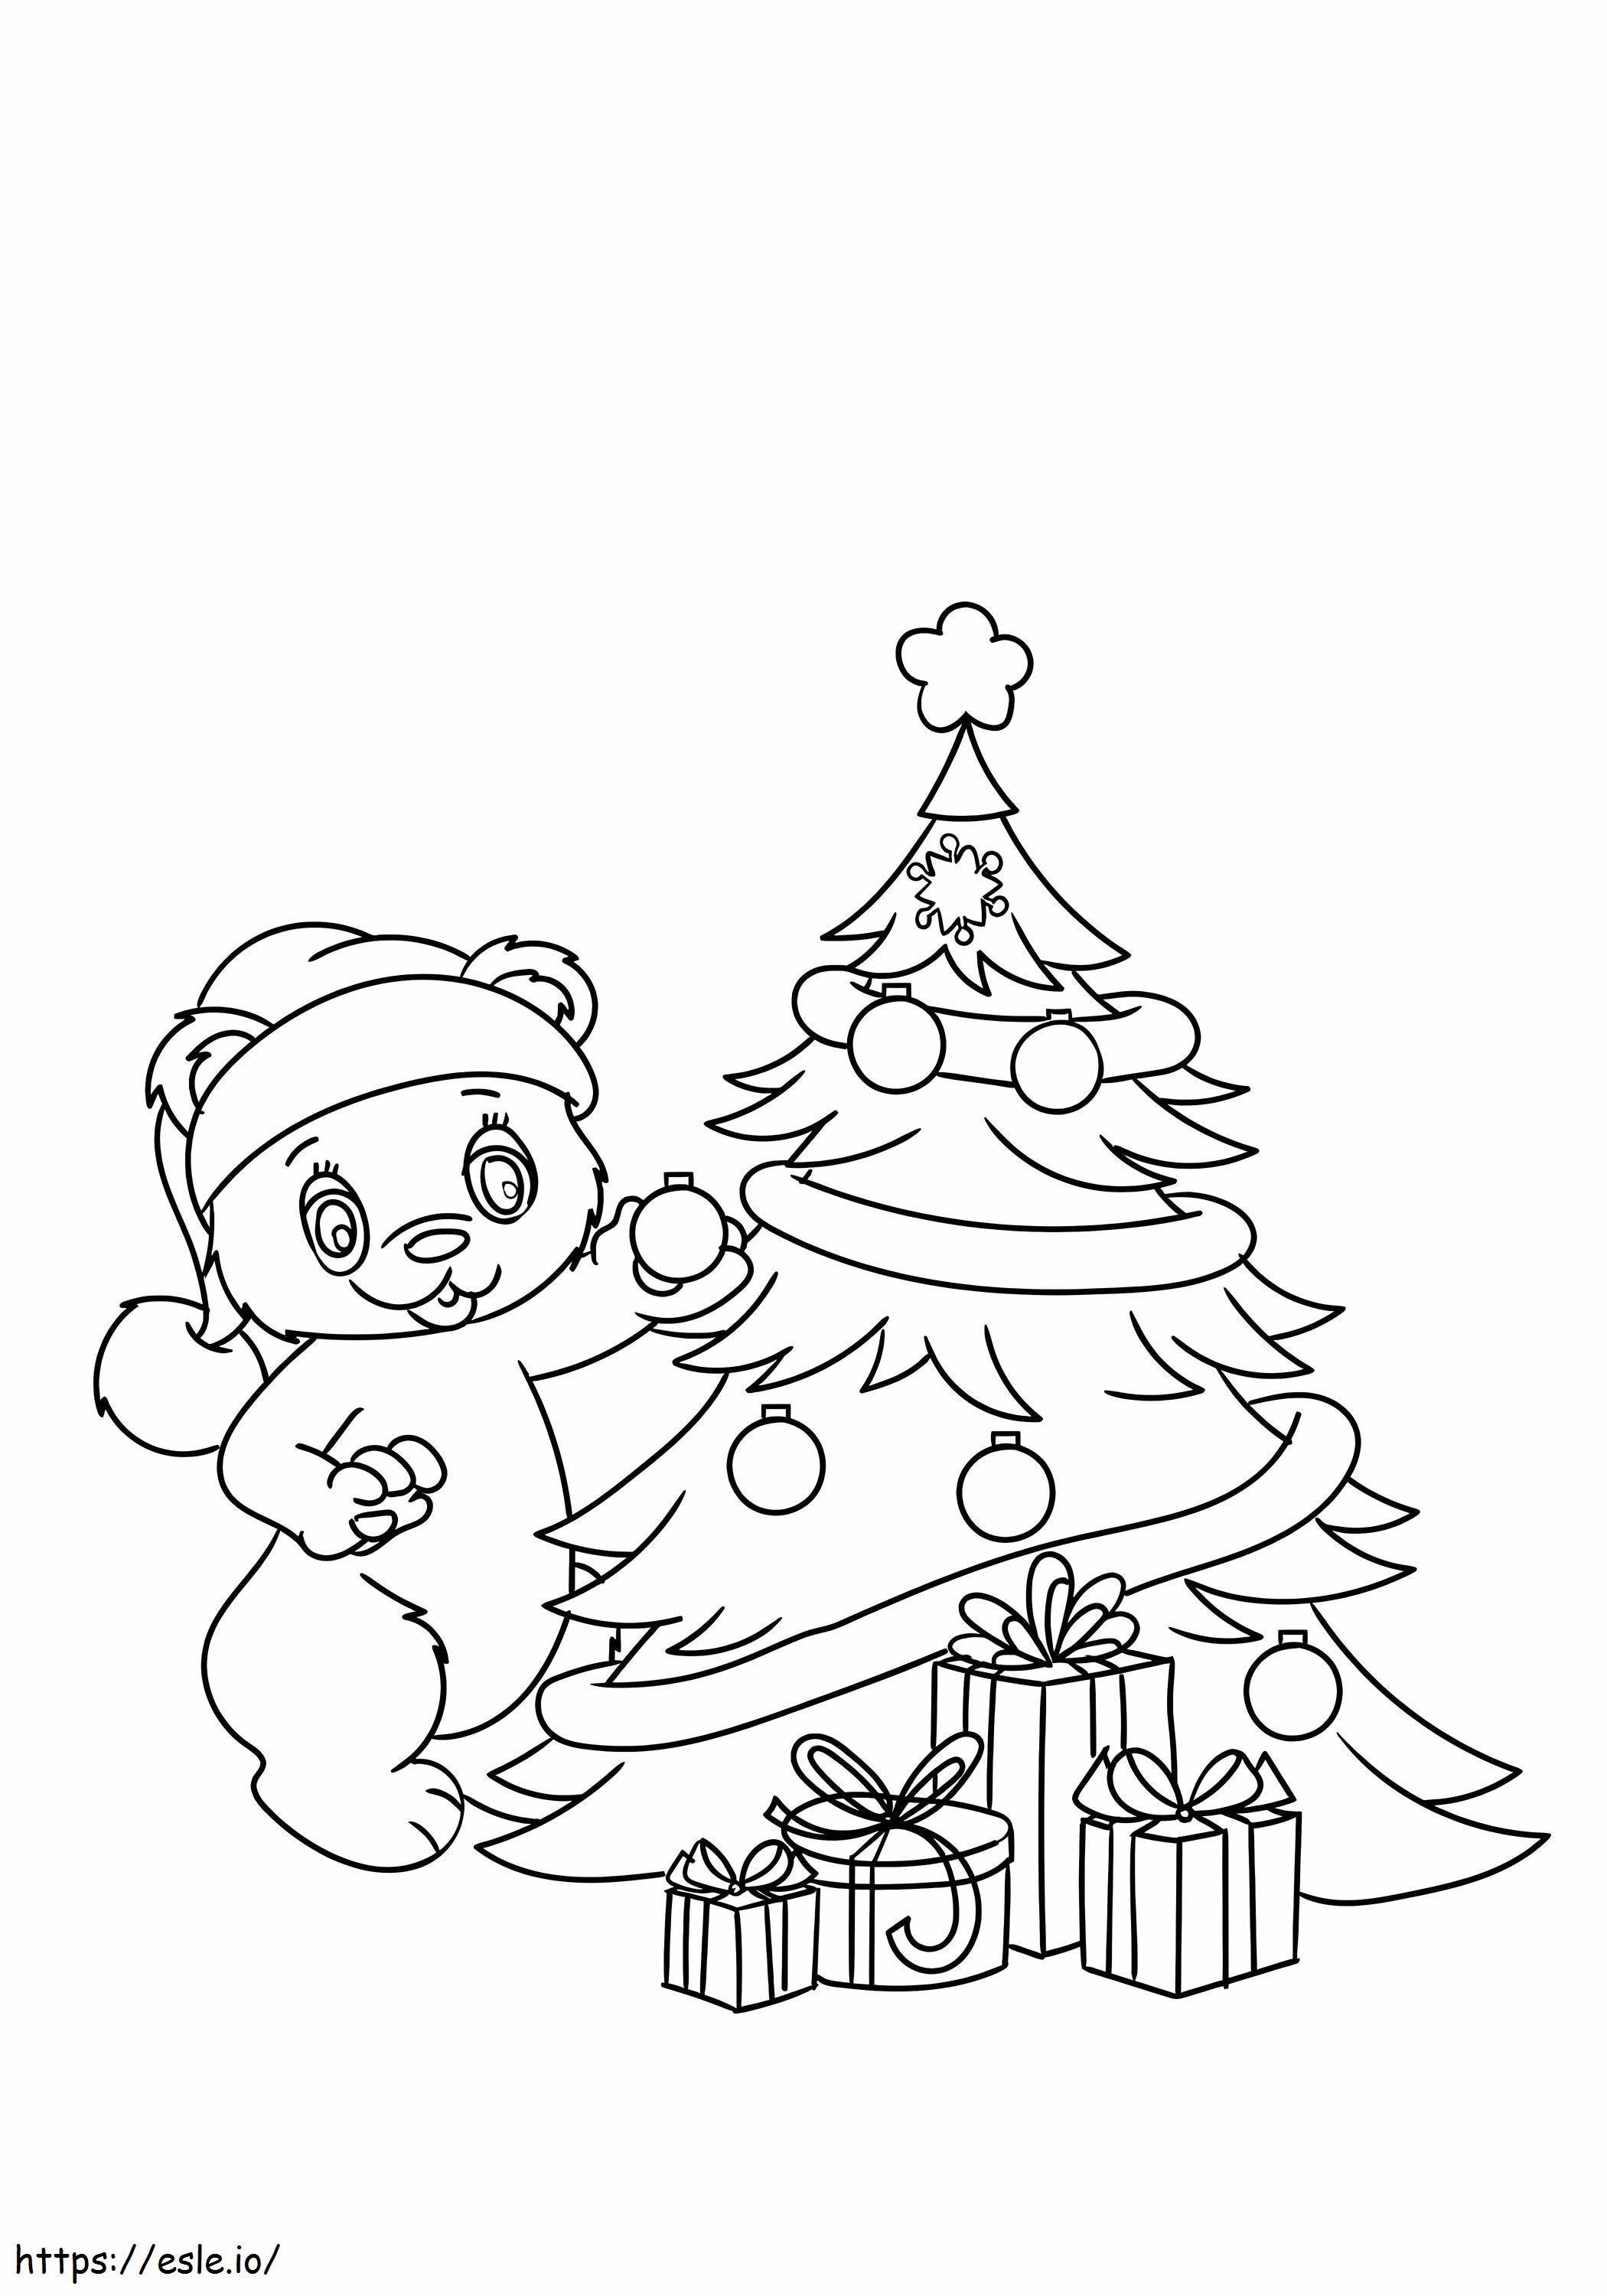 Teddy Decorating The Christmas Tree coloring page